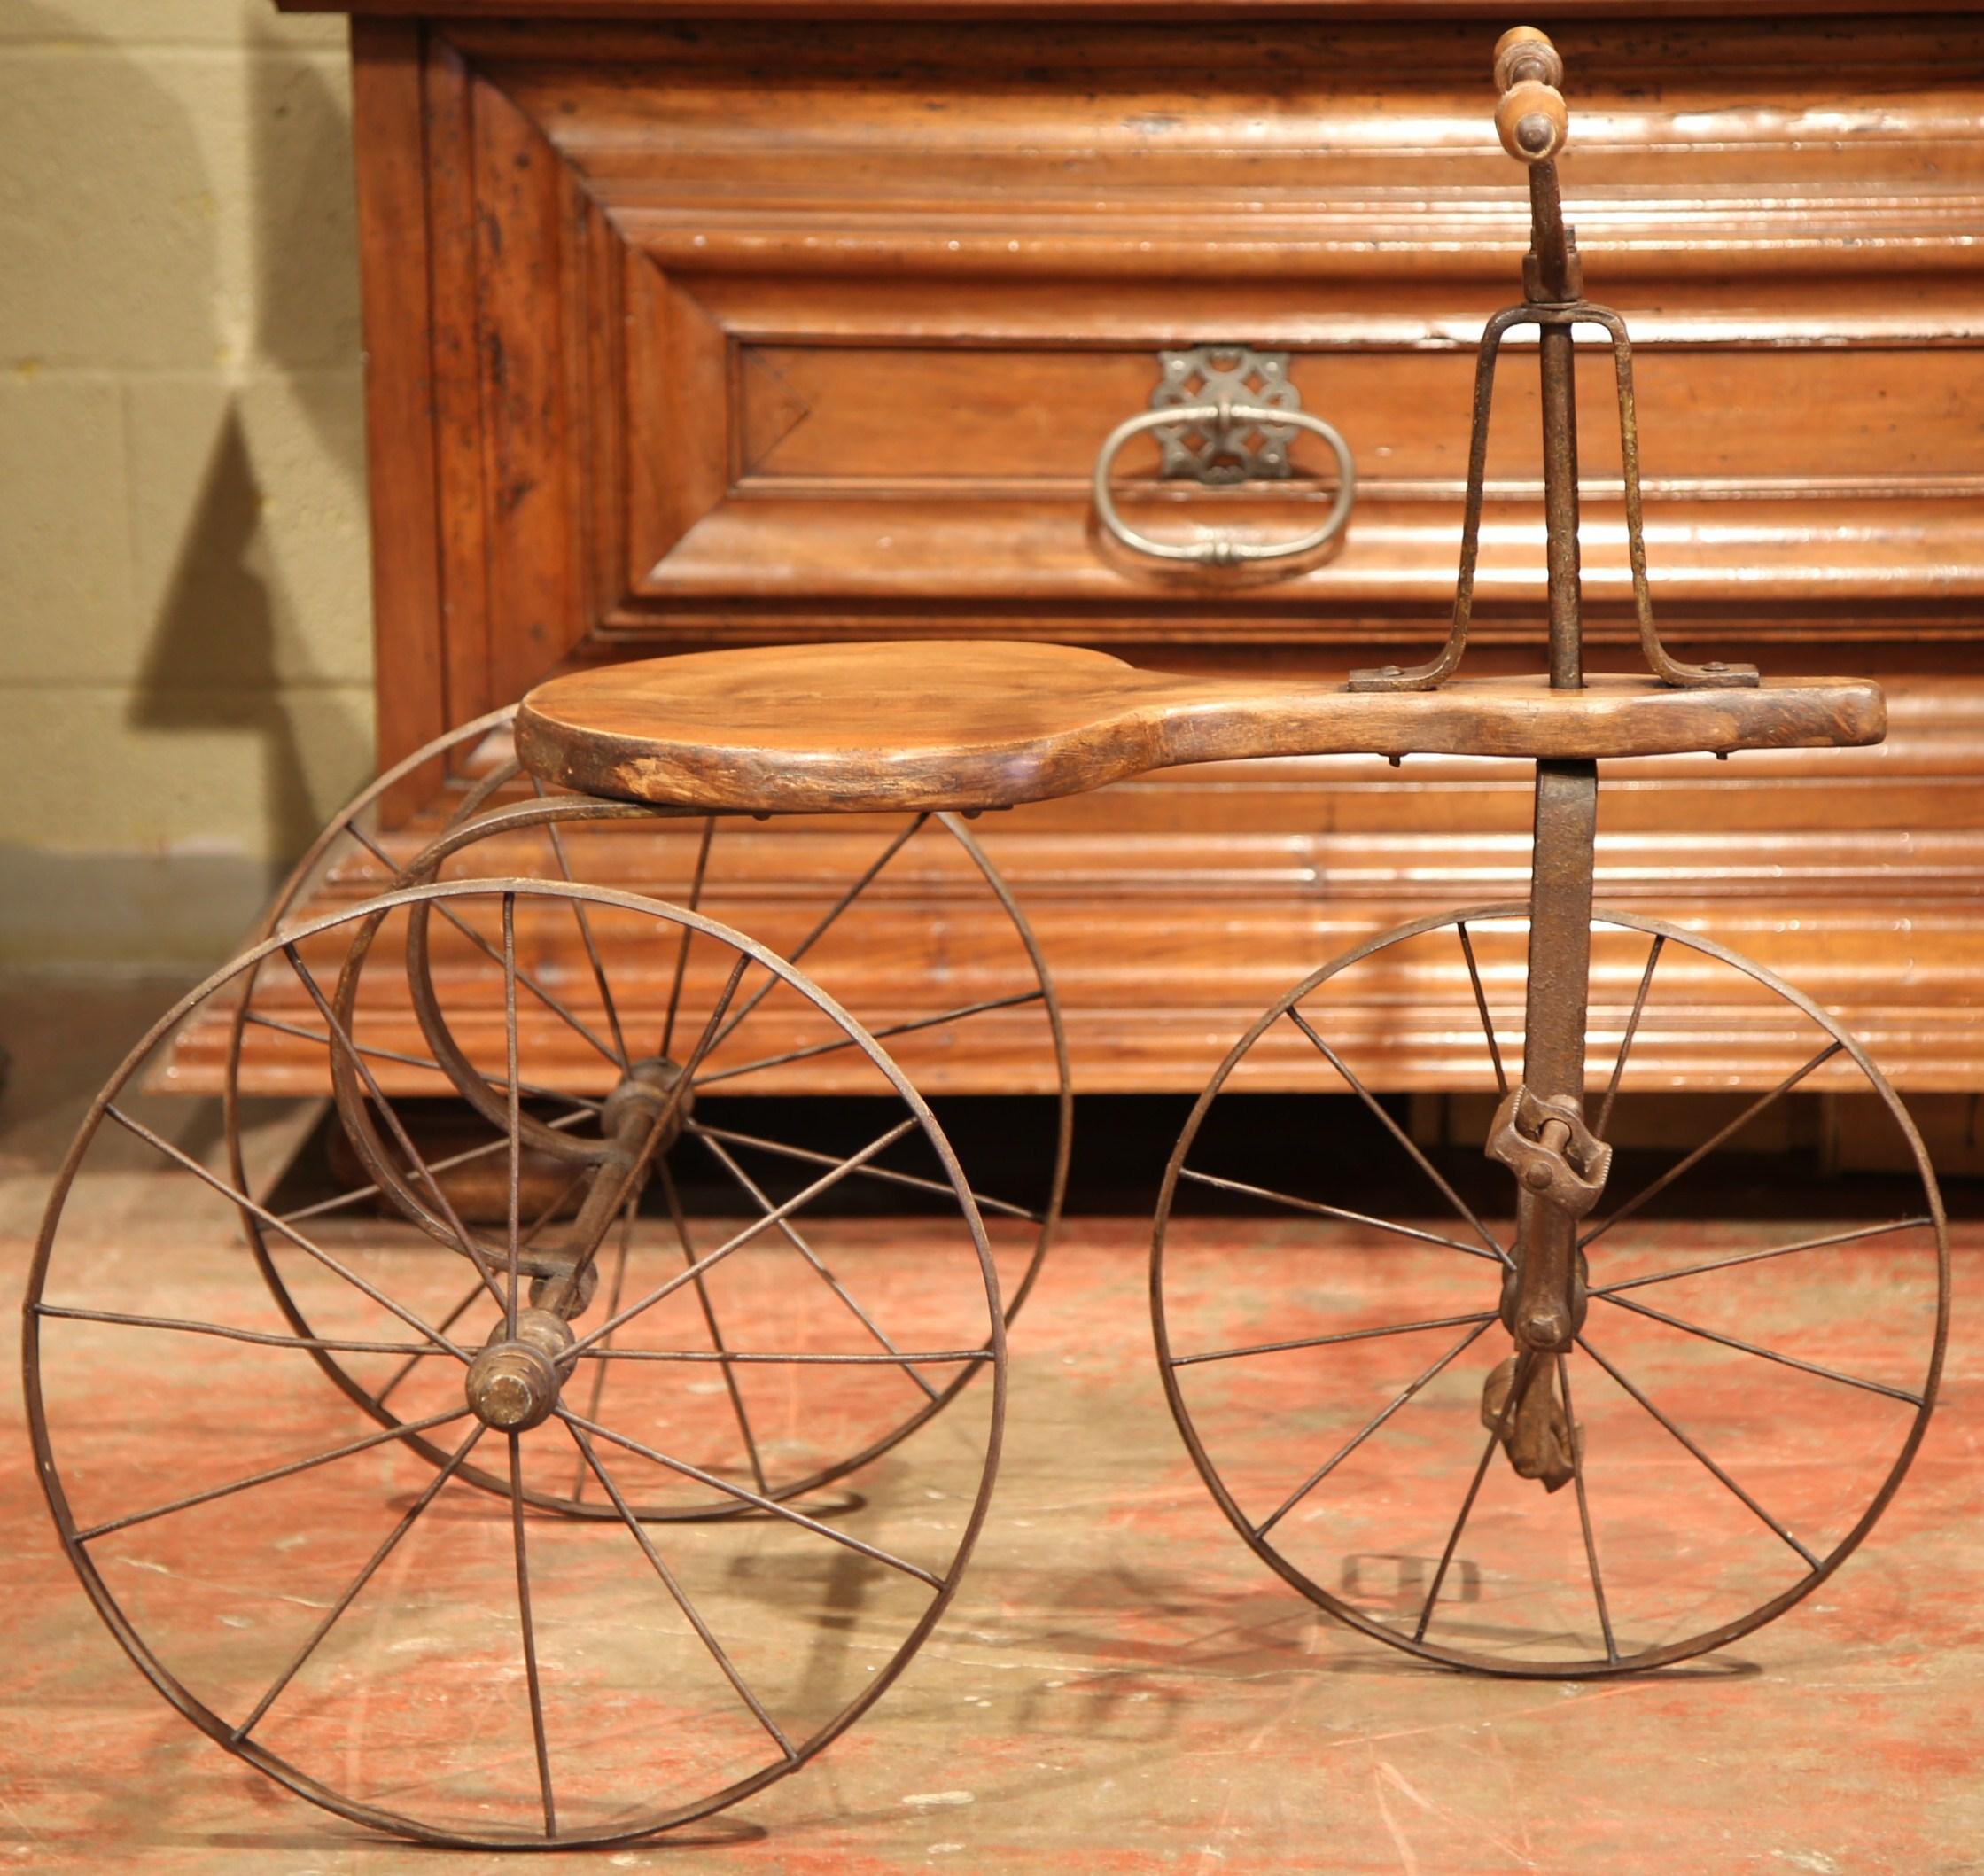 This beautiful, antique tricycle was created in France, circa 1880. The child's bicycle has a walnut seat and walnut handles with forged wheels and thin frame. The authentic children's toy is in excellent working condition with original patinated